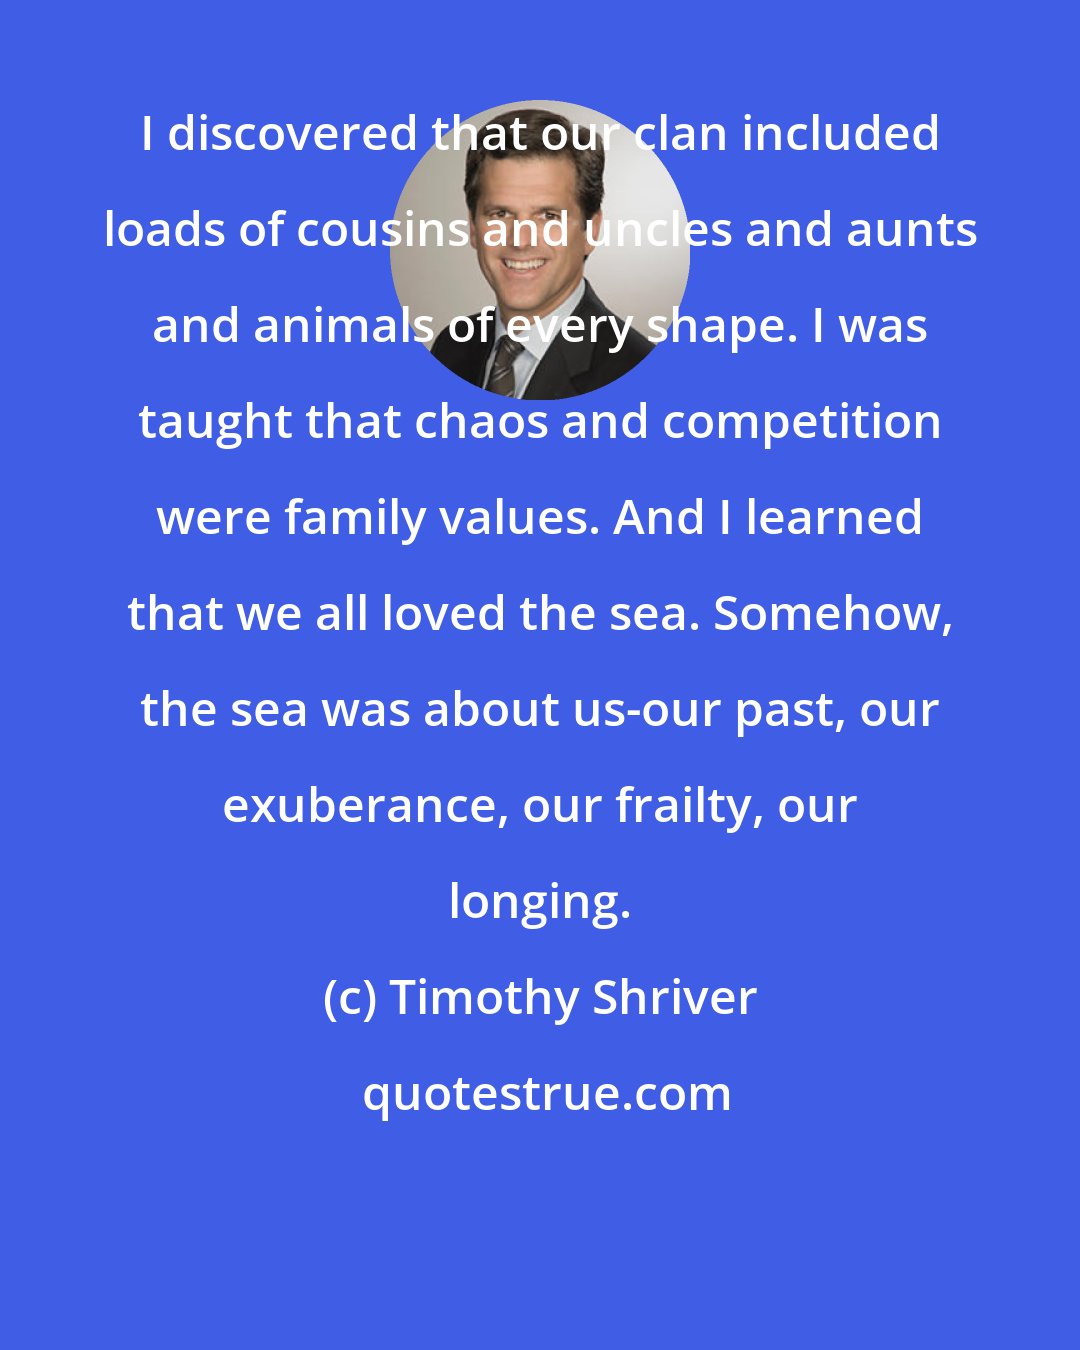 Timothy Shriver: I discovered that our clan included loads of cousins and uncles and aunts and animals of every shape. I was taught that chaos and competition were family values. And I learned that we all loved the sea. Somehow, the sea was about us-our past, our exuberance, our frailty, our longing.